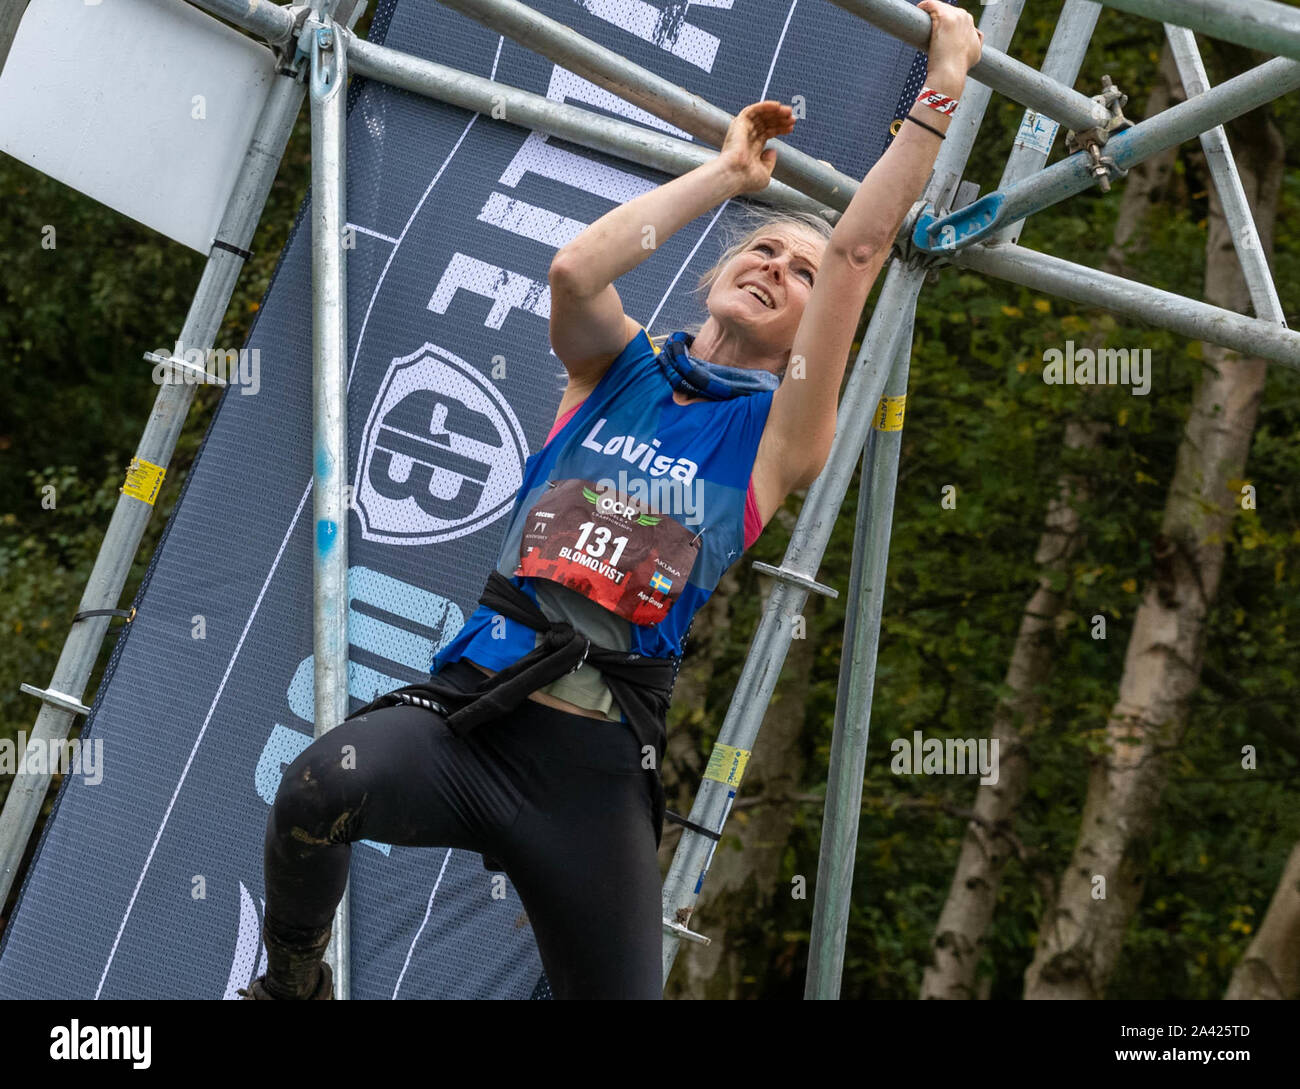 Brentwood, Essex, UK, 11th Oct. 2019 The 2019 Obstacle  Course Racing OCR)   World Championships,  day one, the premier independent world championships for the sport of Obstacle Course Racing. Now drawing athletes from over 65 nations with a mixture of profesional and amateur age groups Credit Ian DavidsonAlamy Live News Stock Photo